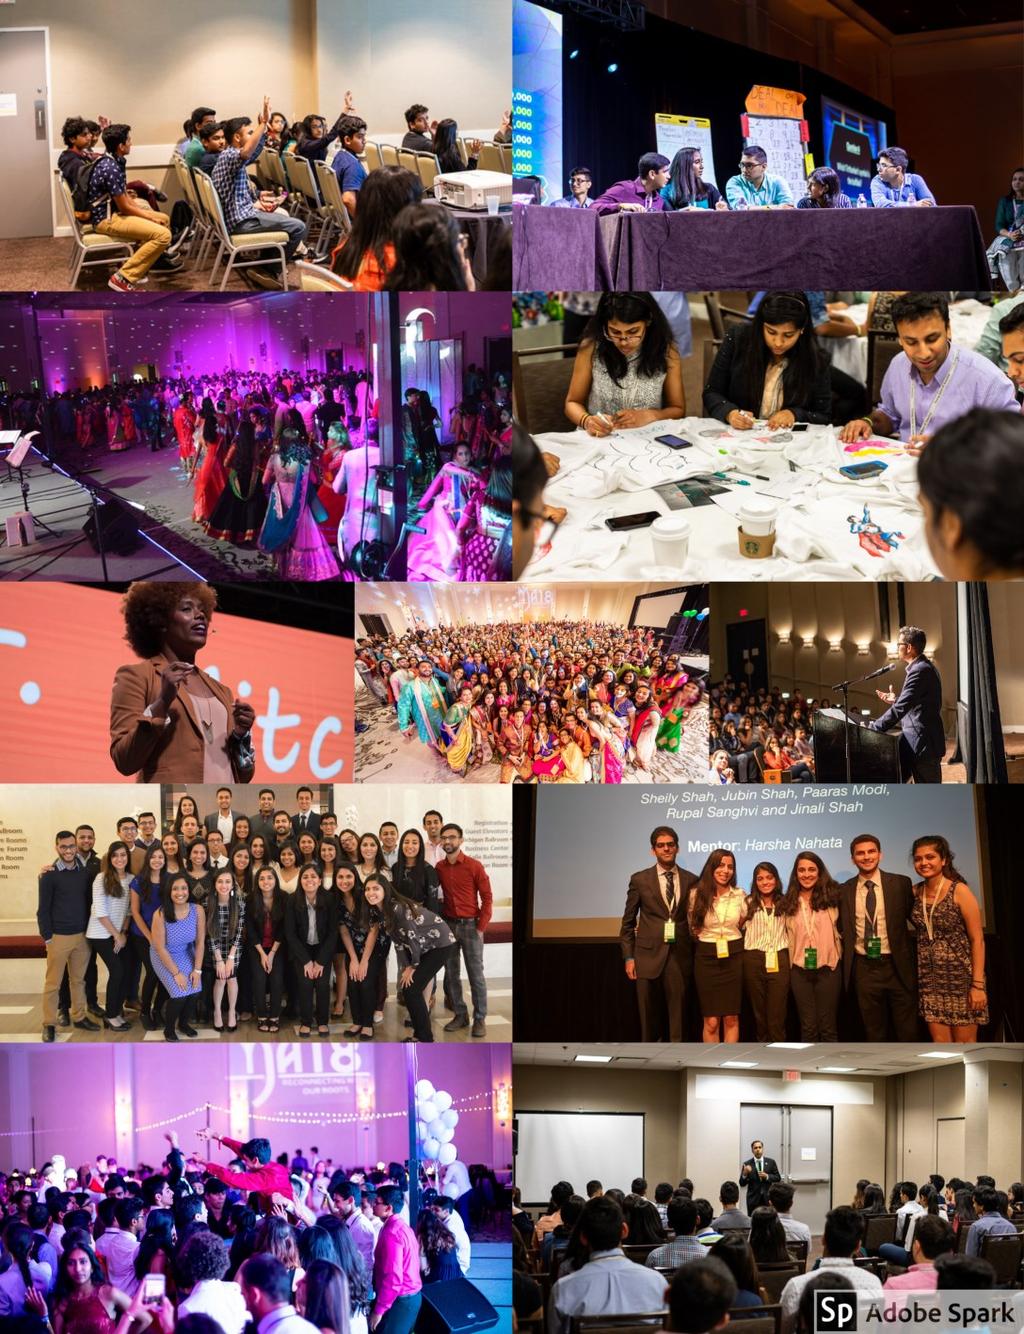 They interacted with 128 thought provoking speakers in 184 engaging sessions that focused on Jain education, lifestyle, career and networking, diversity and inclusion, and current events and social